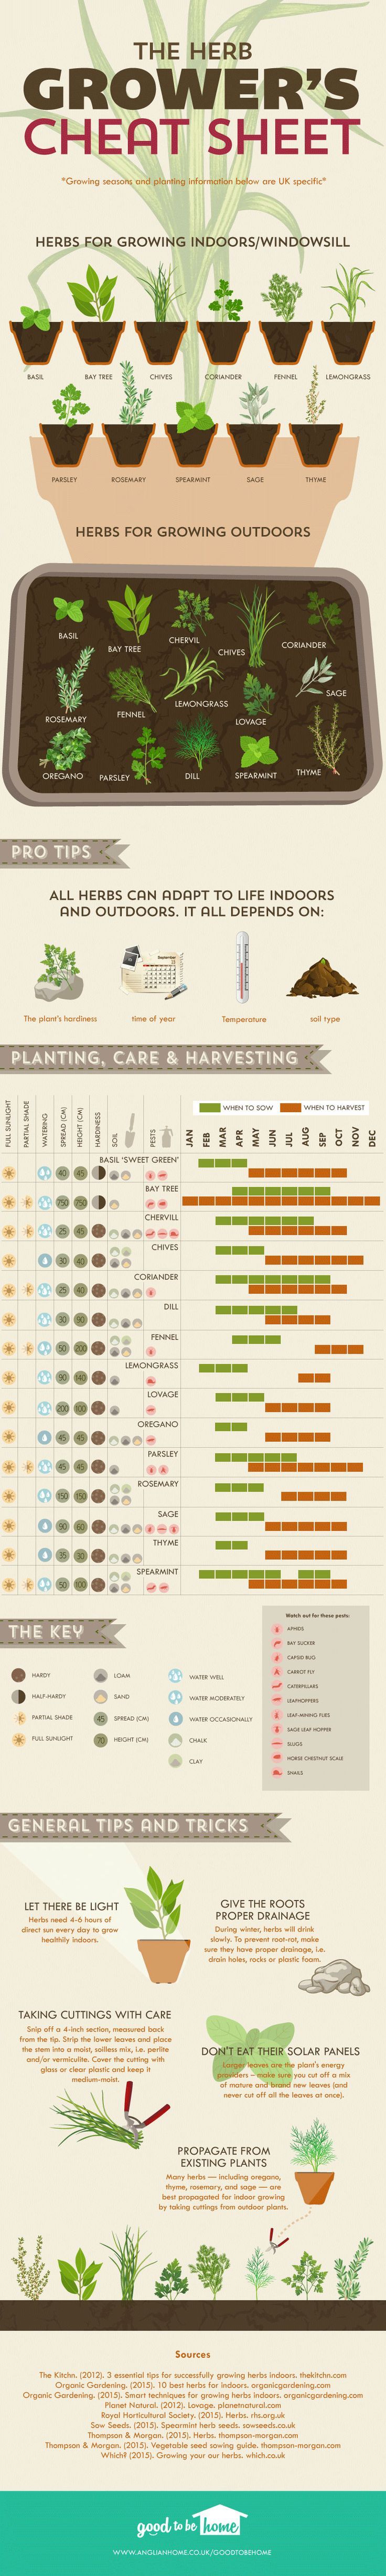 Herb Grower's Cheat Sheet - which ones can be grown inside, when to plant, w...